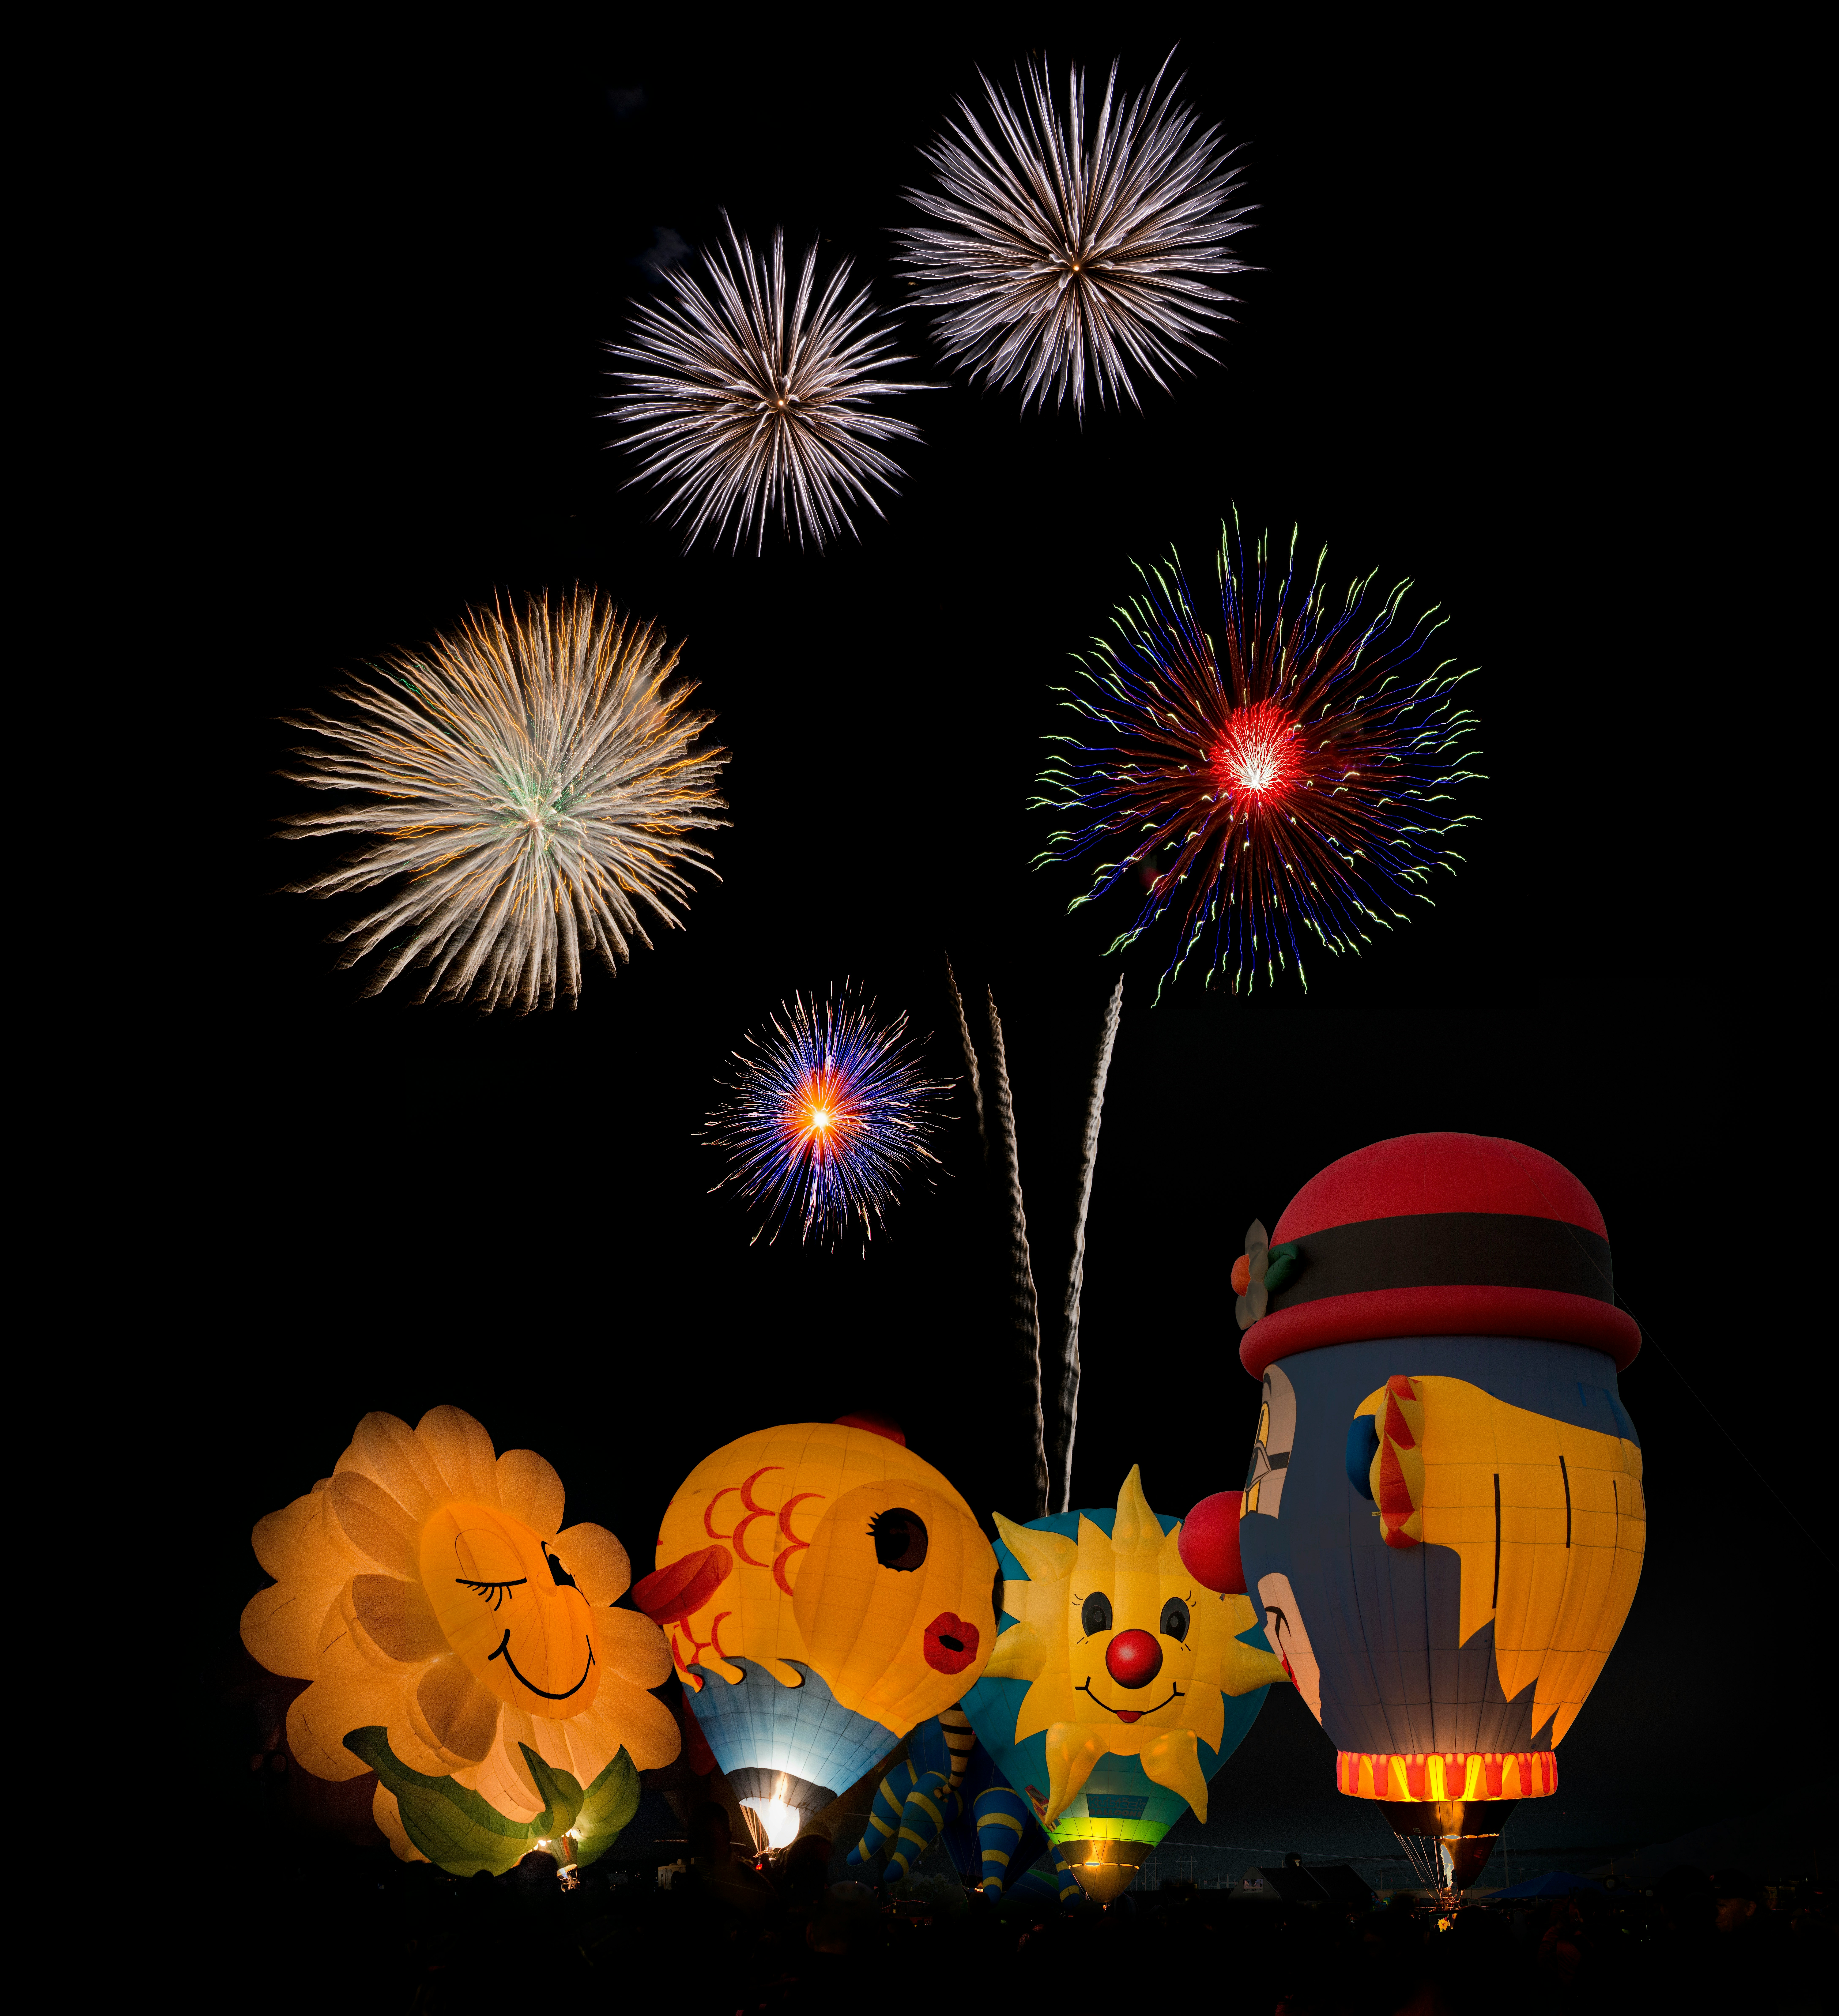 hot air balloons and fireworks display